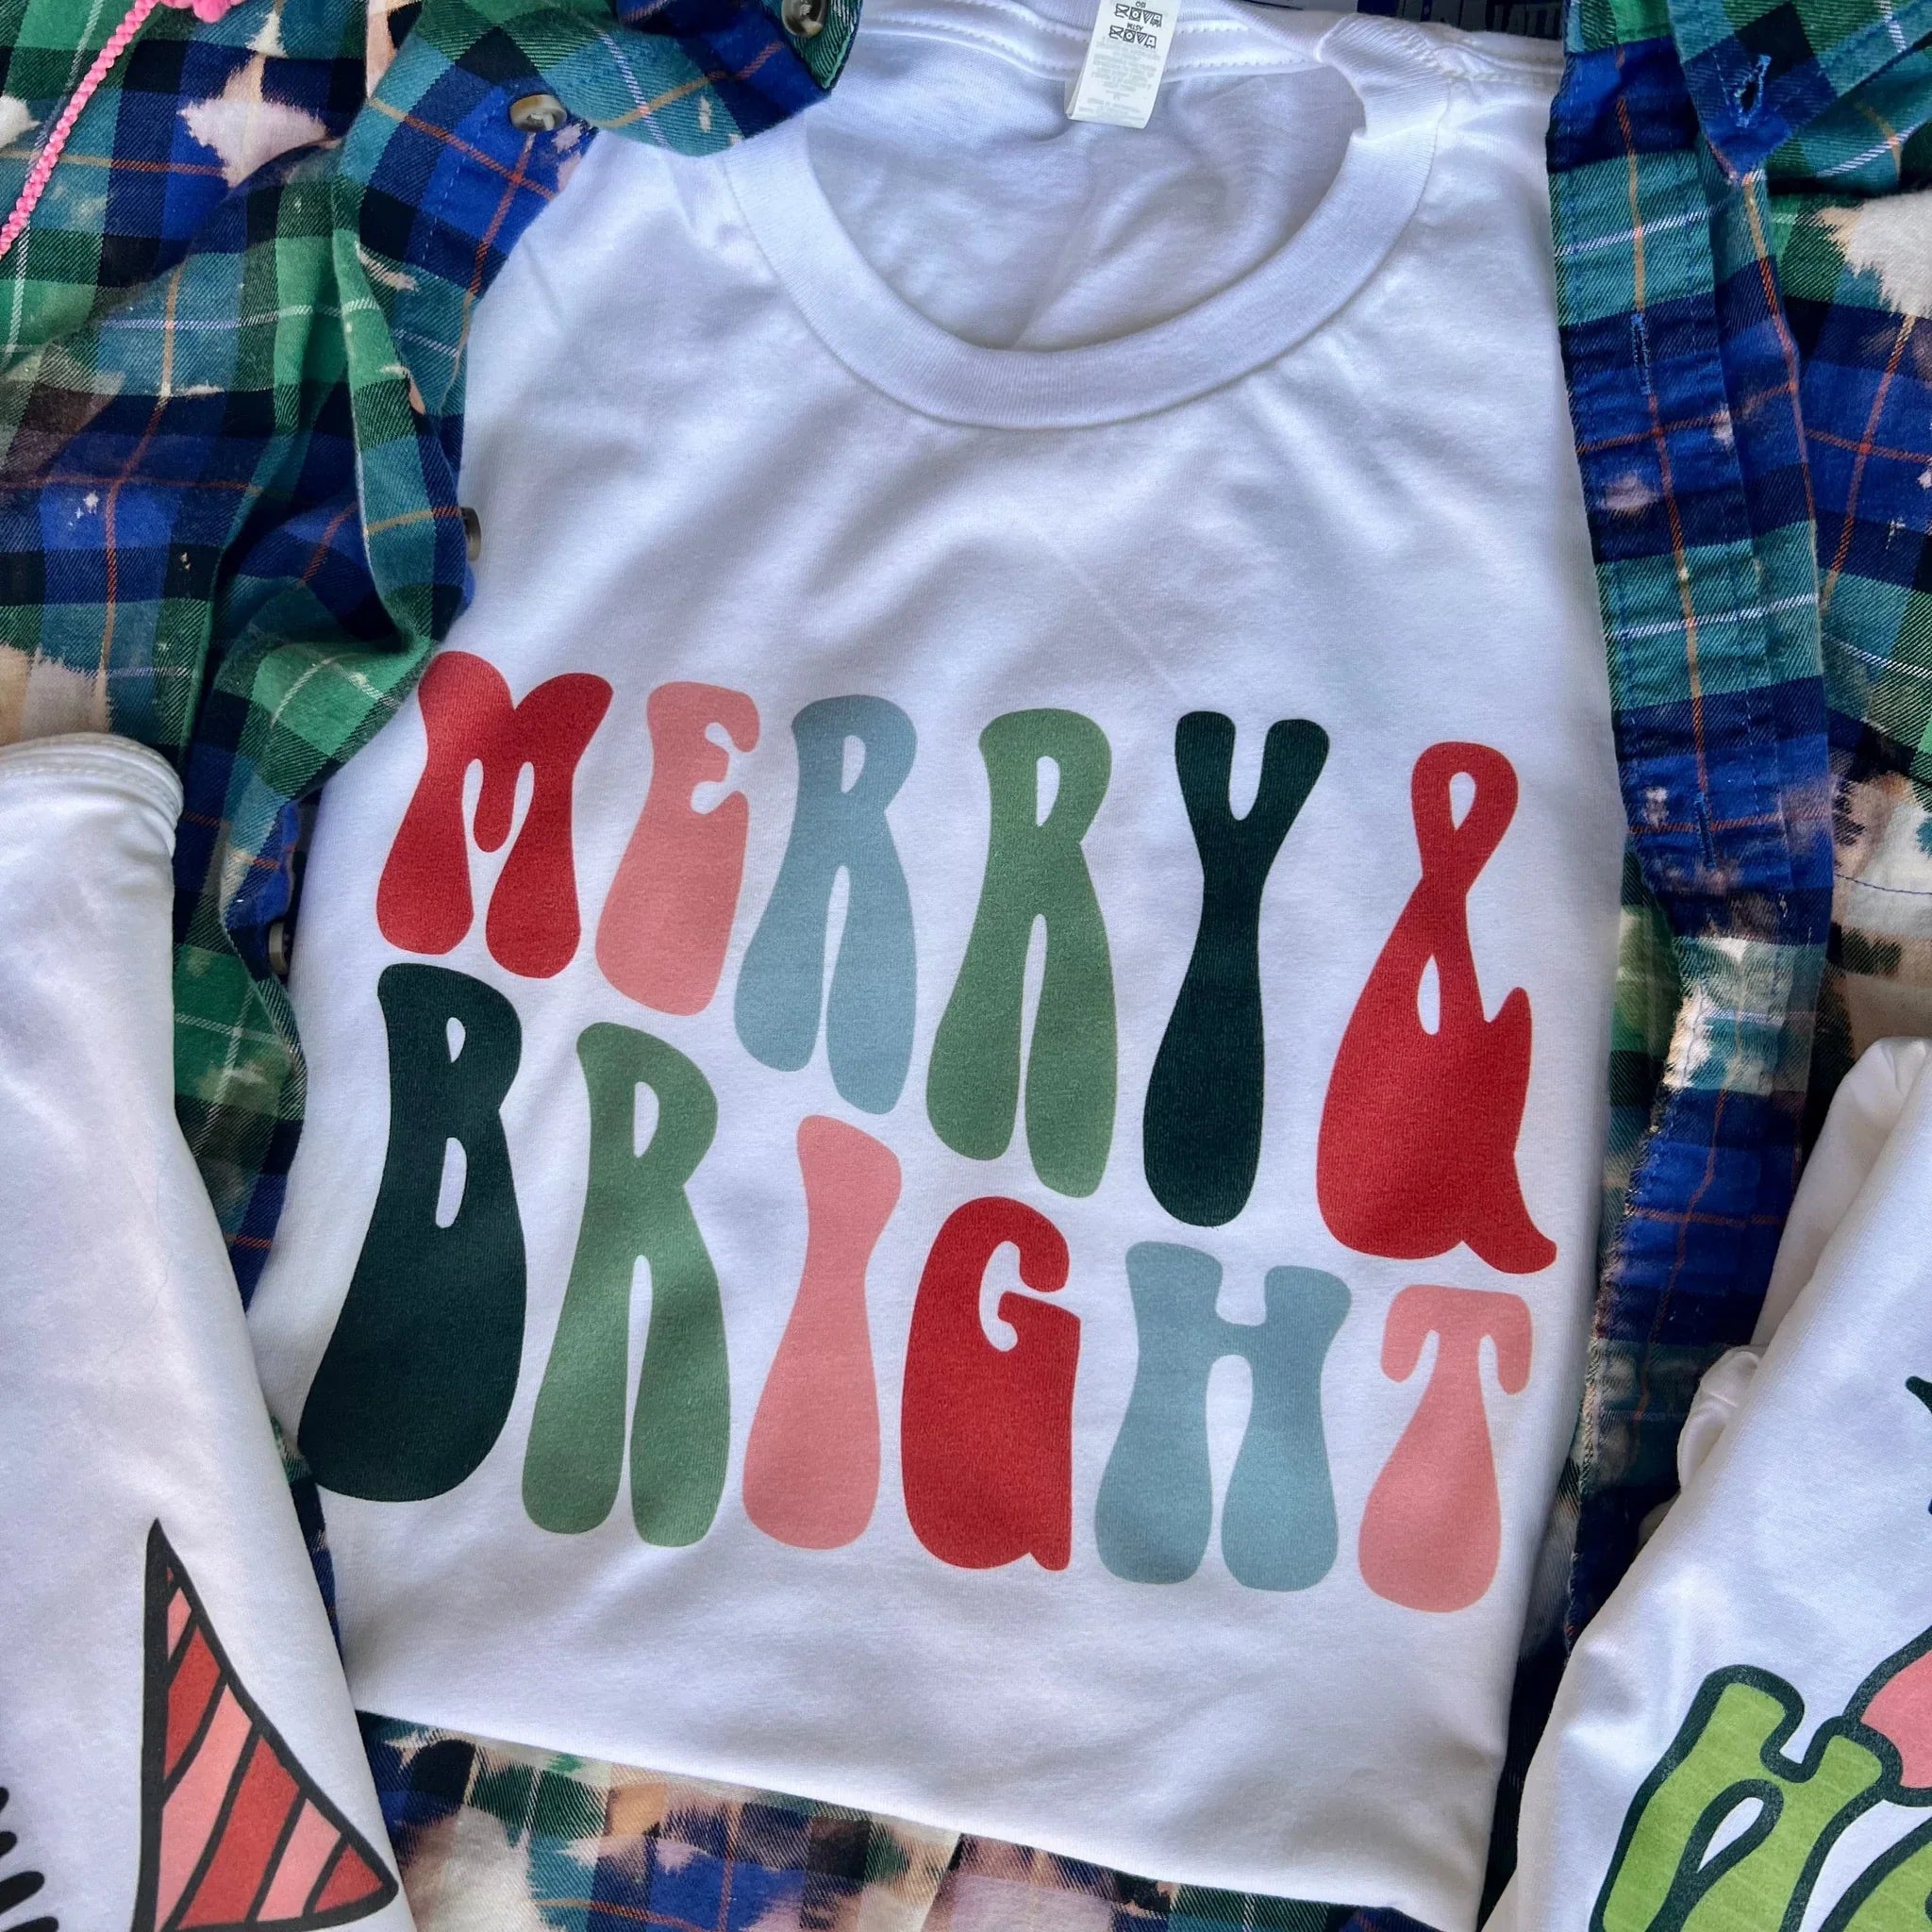 This white tee includes a crew neckline, short sleeves, and a cute Christmas saying "Merry & Bright" in a bubble font with different colors. This is shown here as a folded flat lay on top of a plaid button up shirt.